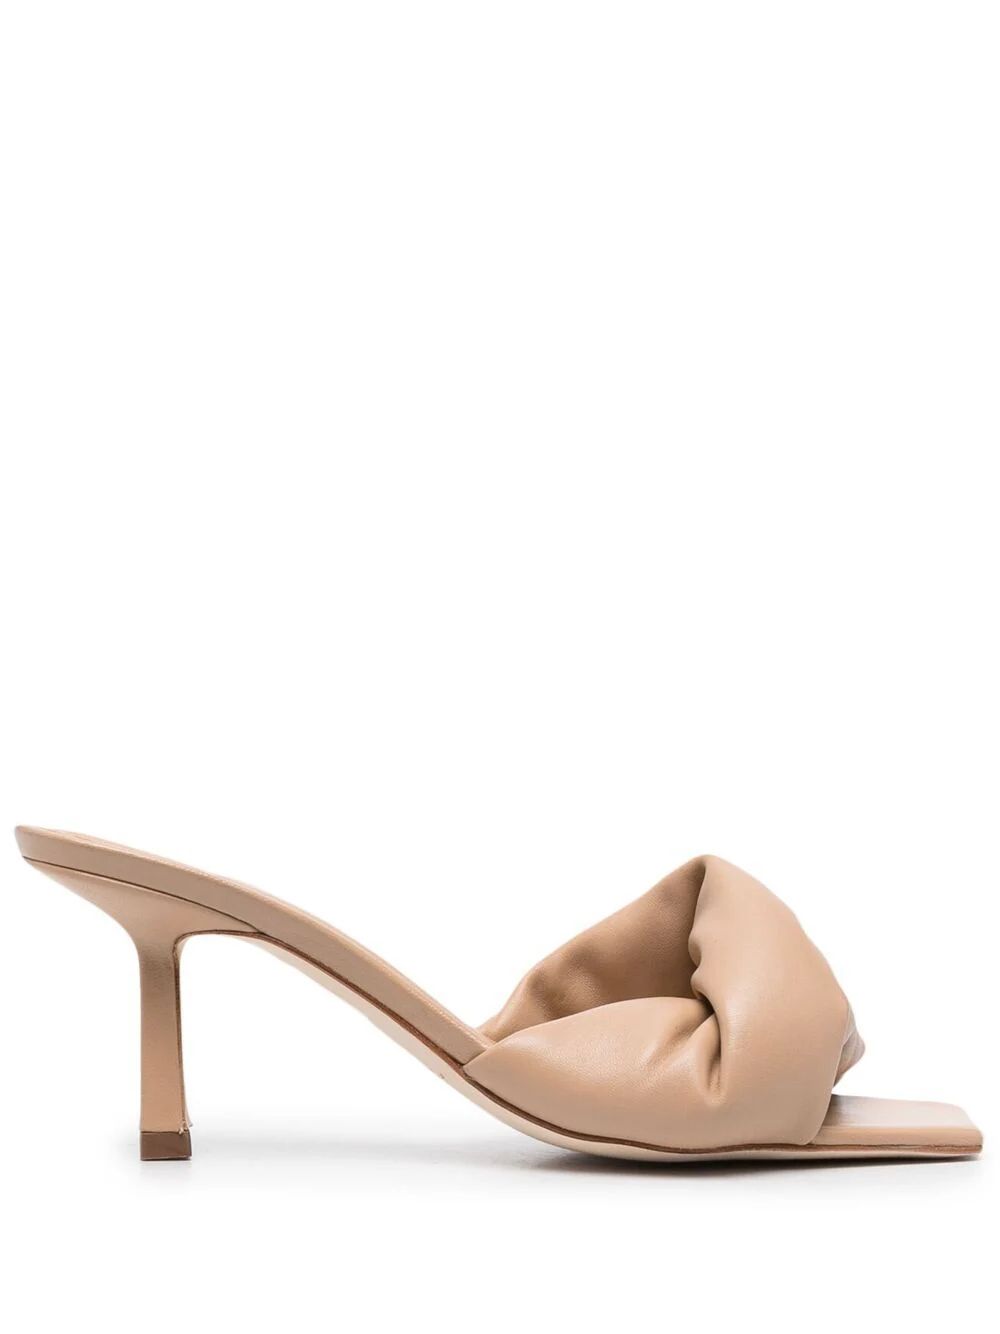 padded leather sandals | Farfetch (US)